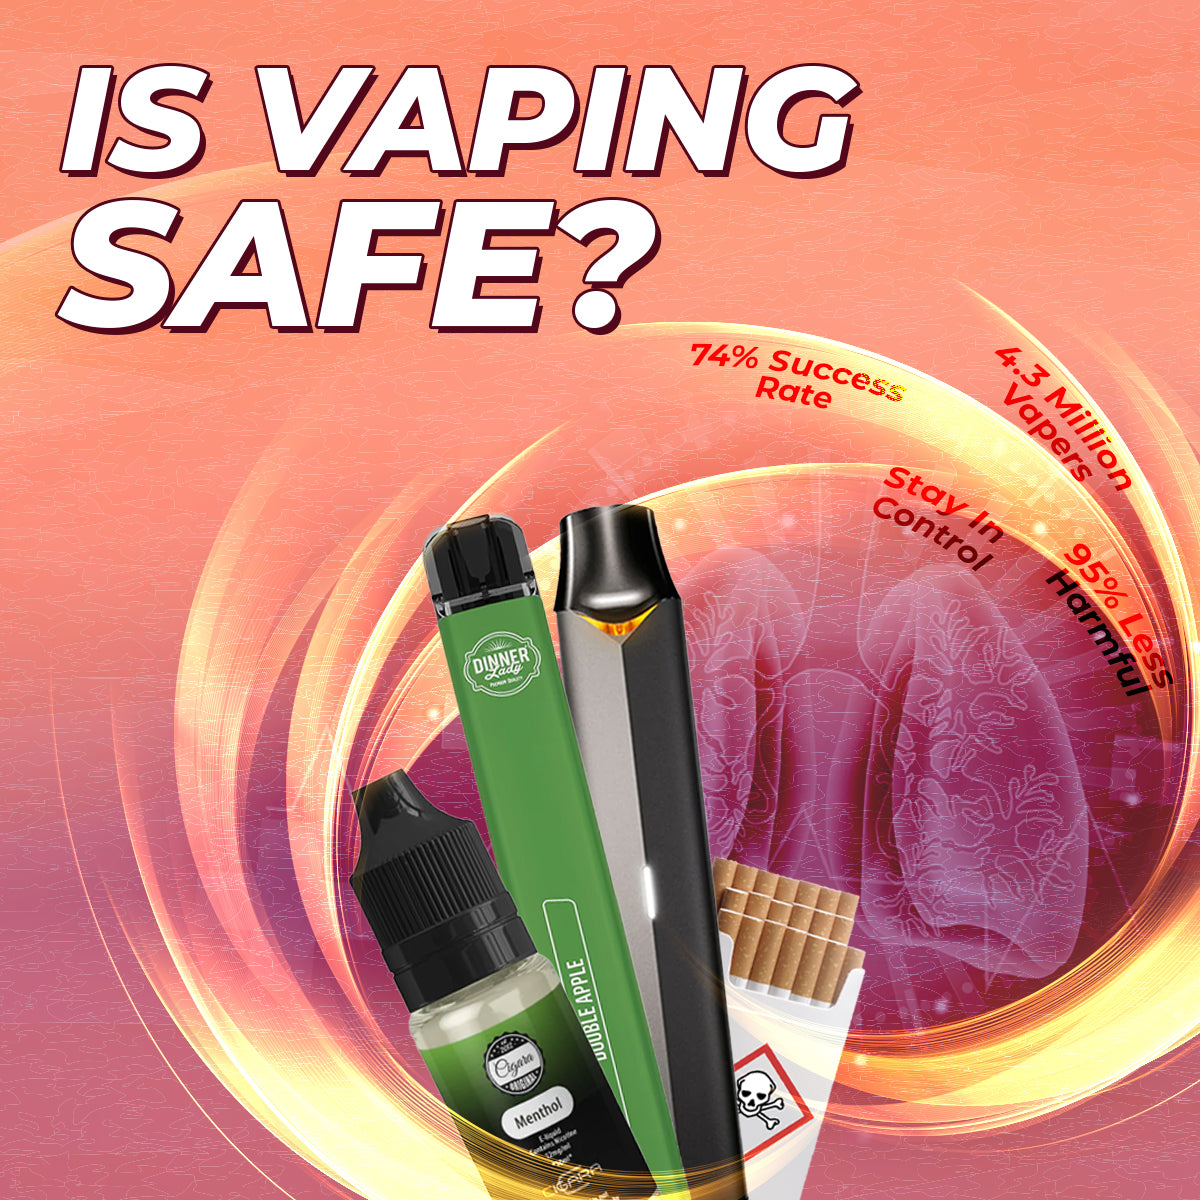 Is Vaping Safe? What You Need to Know